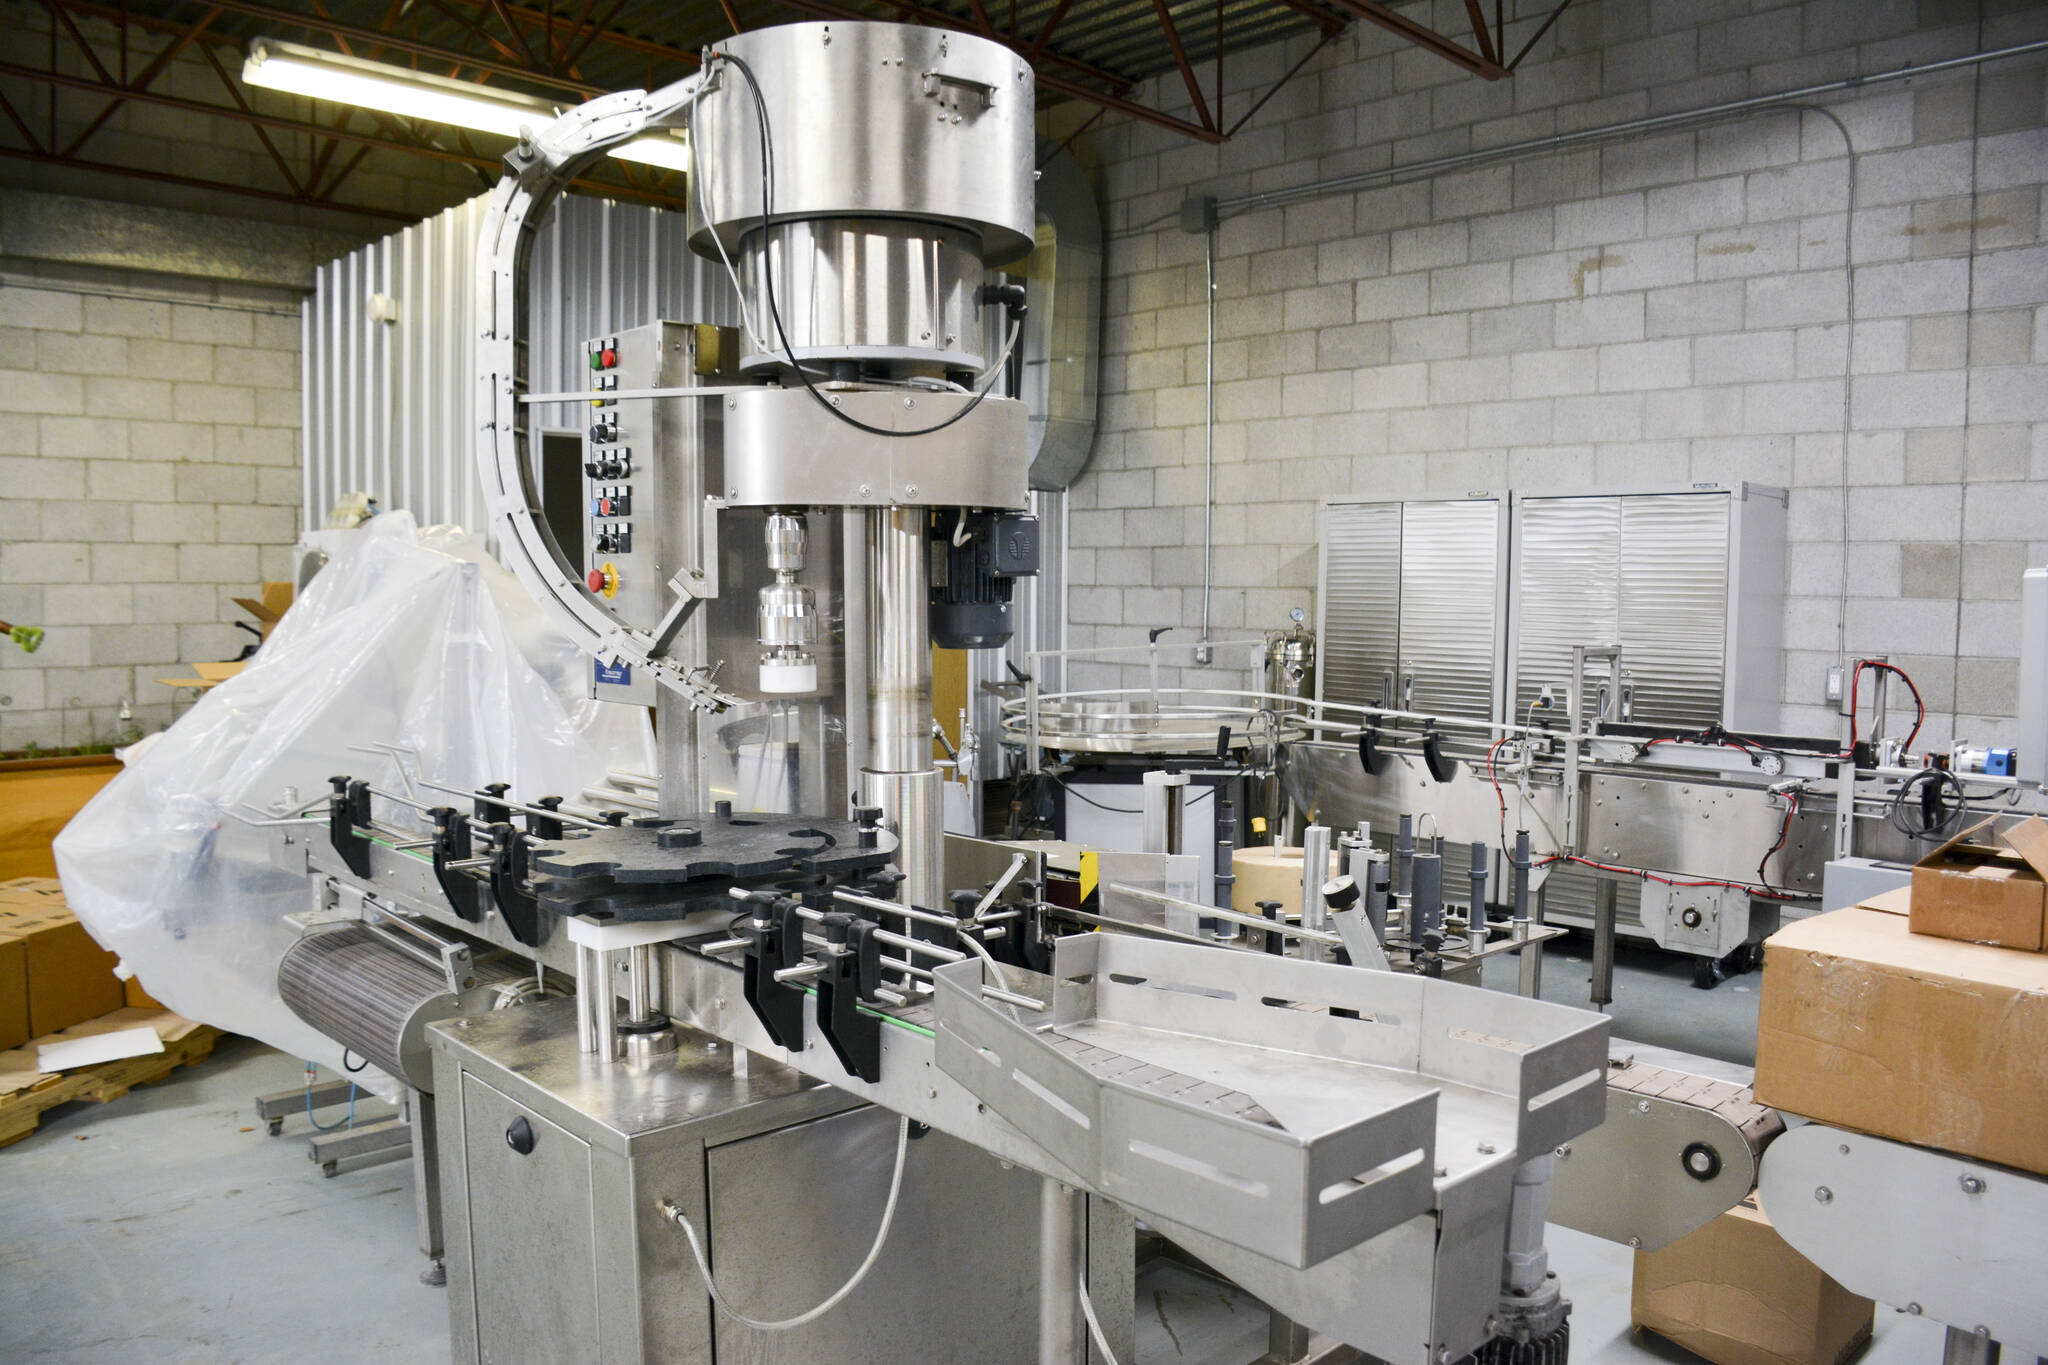 This multi-purpose filling line allows for up to 100 bottles an hour. (Photo by Kelsey Yates)